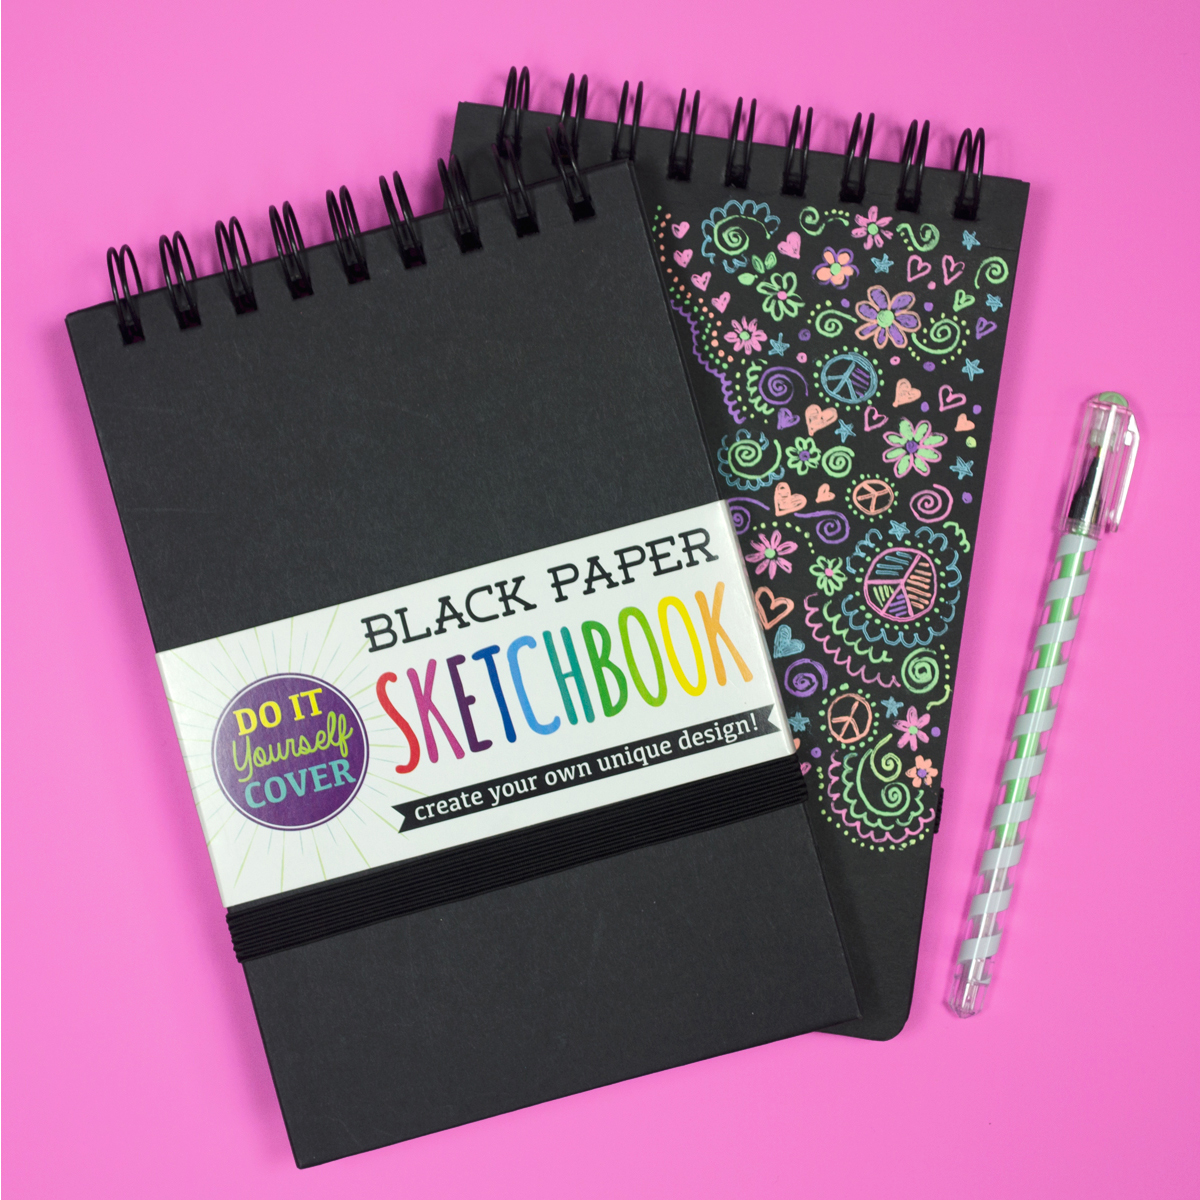 Express Yourself with A Wholesale spiral sketchbook from 